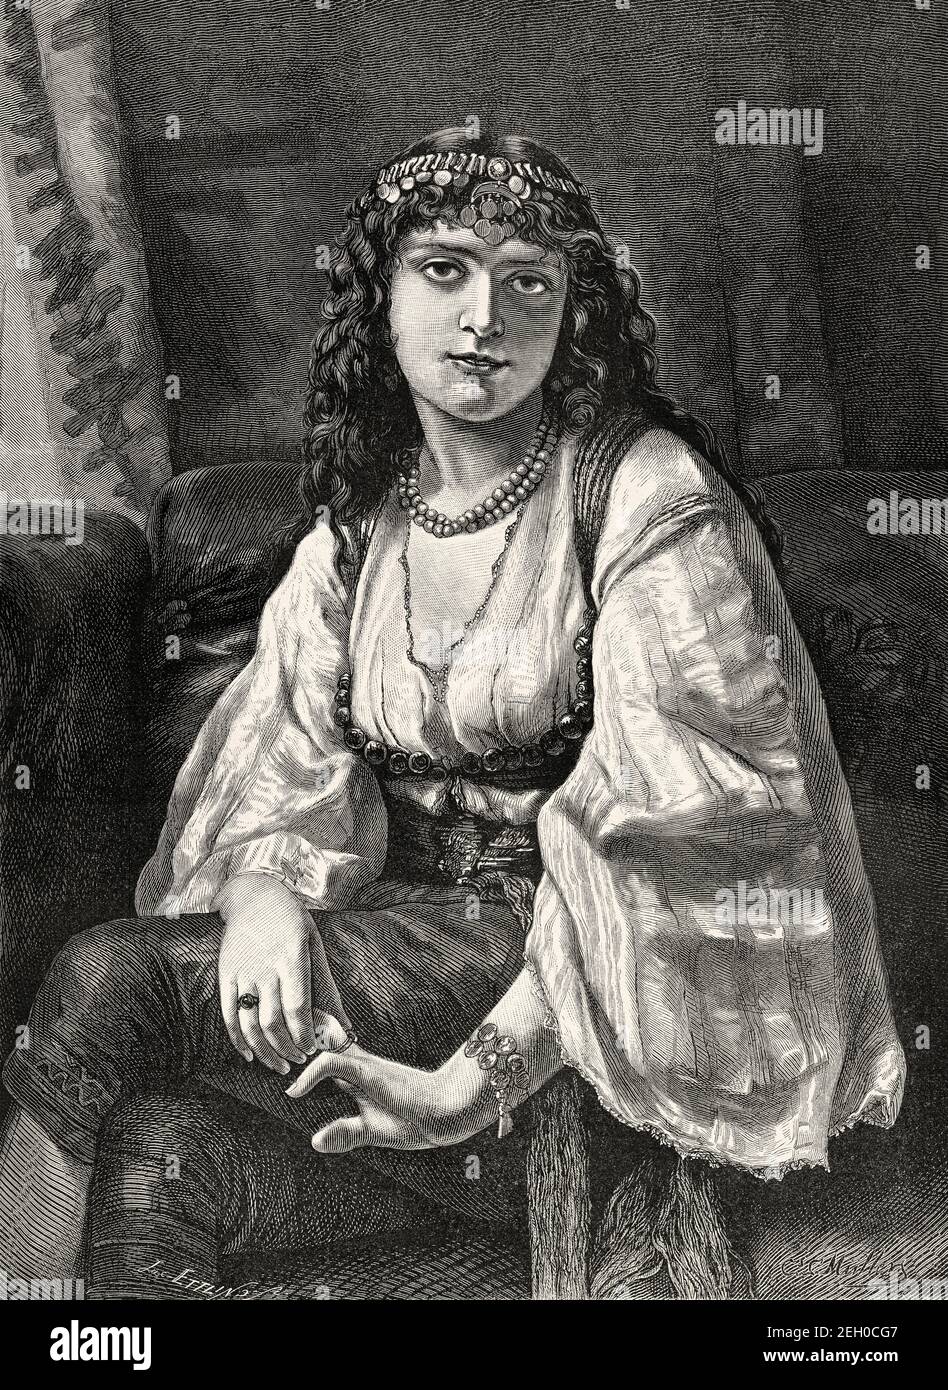 Portrait of a beautiful young syrian woman dressed in traditional nineteenth century clothing, Syria. Old 19th century engraved illustration from El Mundo Ilustrado 1879 Stock Photo